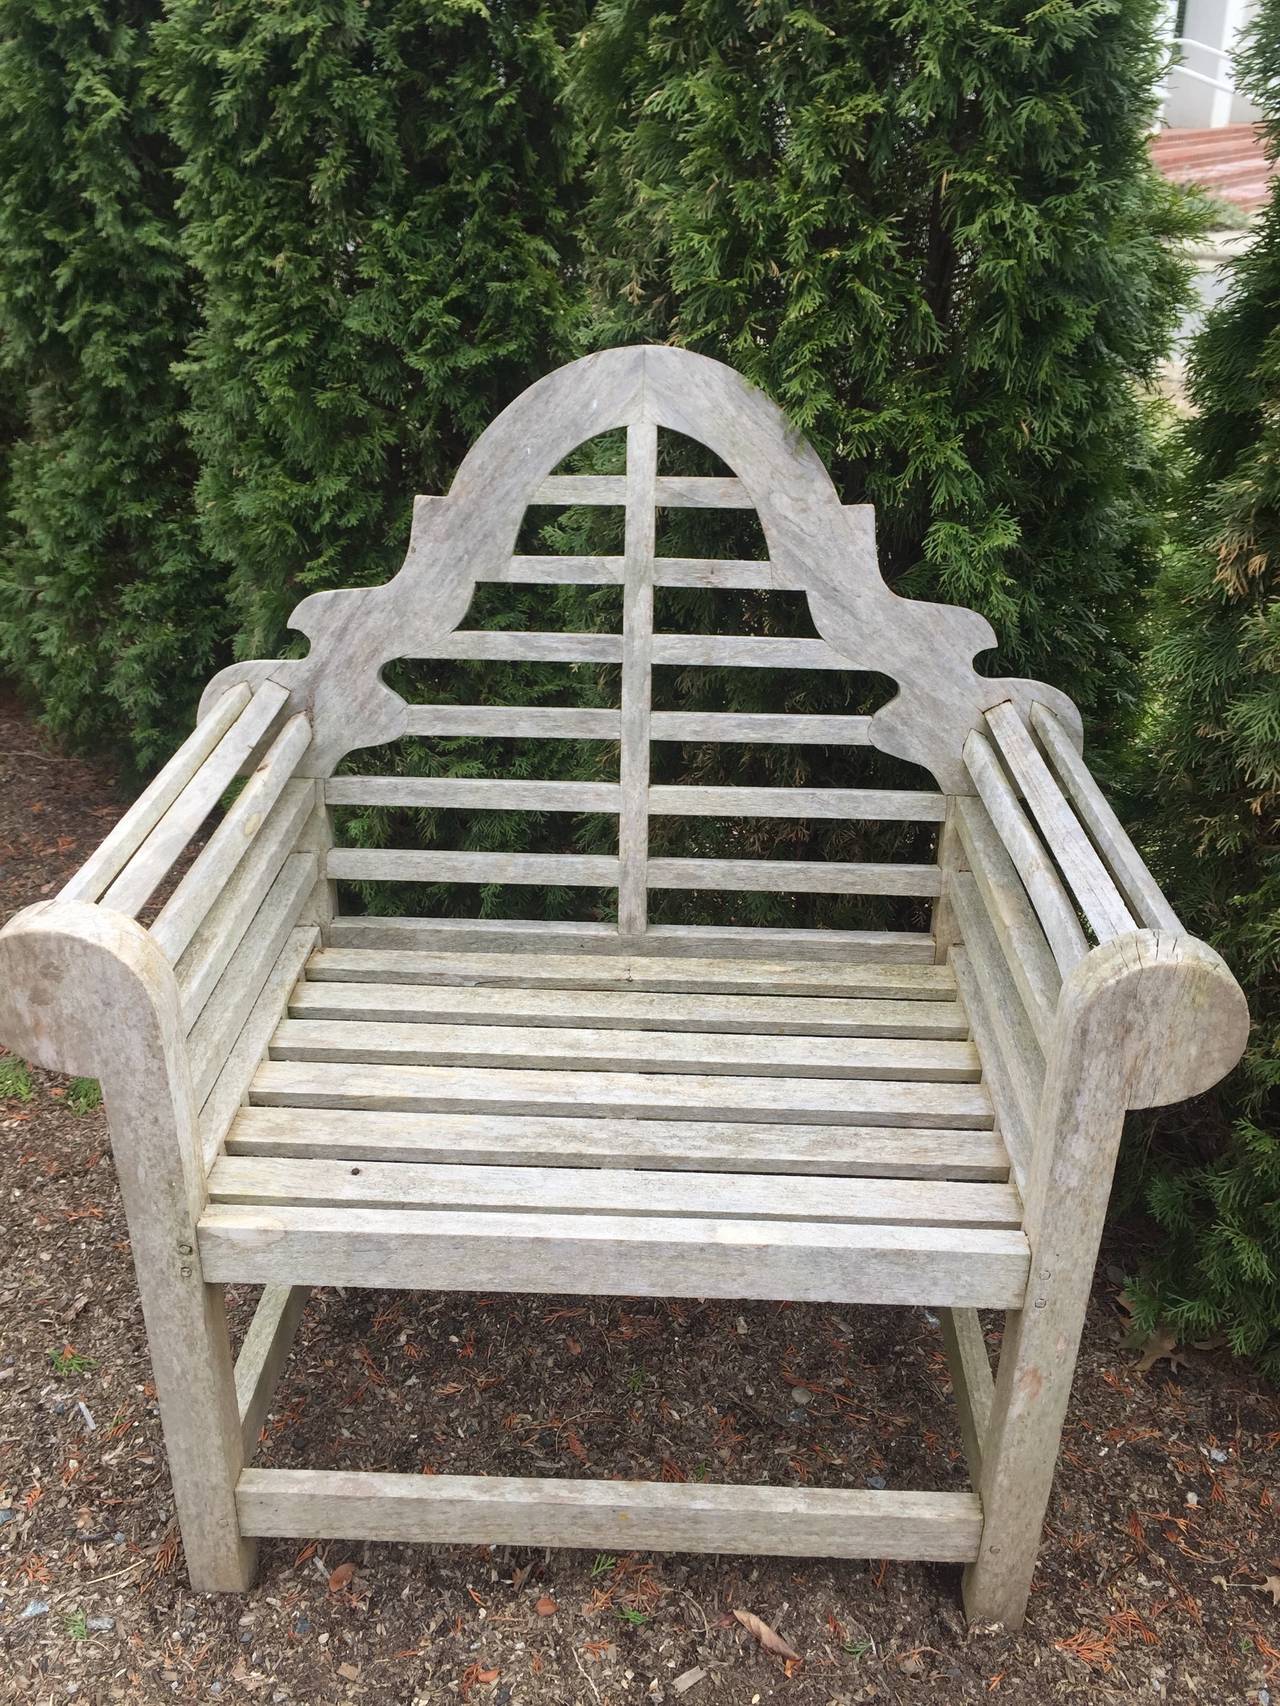 It is very unusual to find a long bench and a pair of chairs in the Classic Lutyens pattern, but here they are! Beautifully silvered, but very clean (no lichen), this hand-pegged and very sturdy teak set will give you decades of enjoyment on your